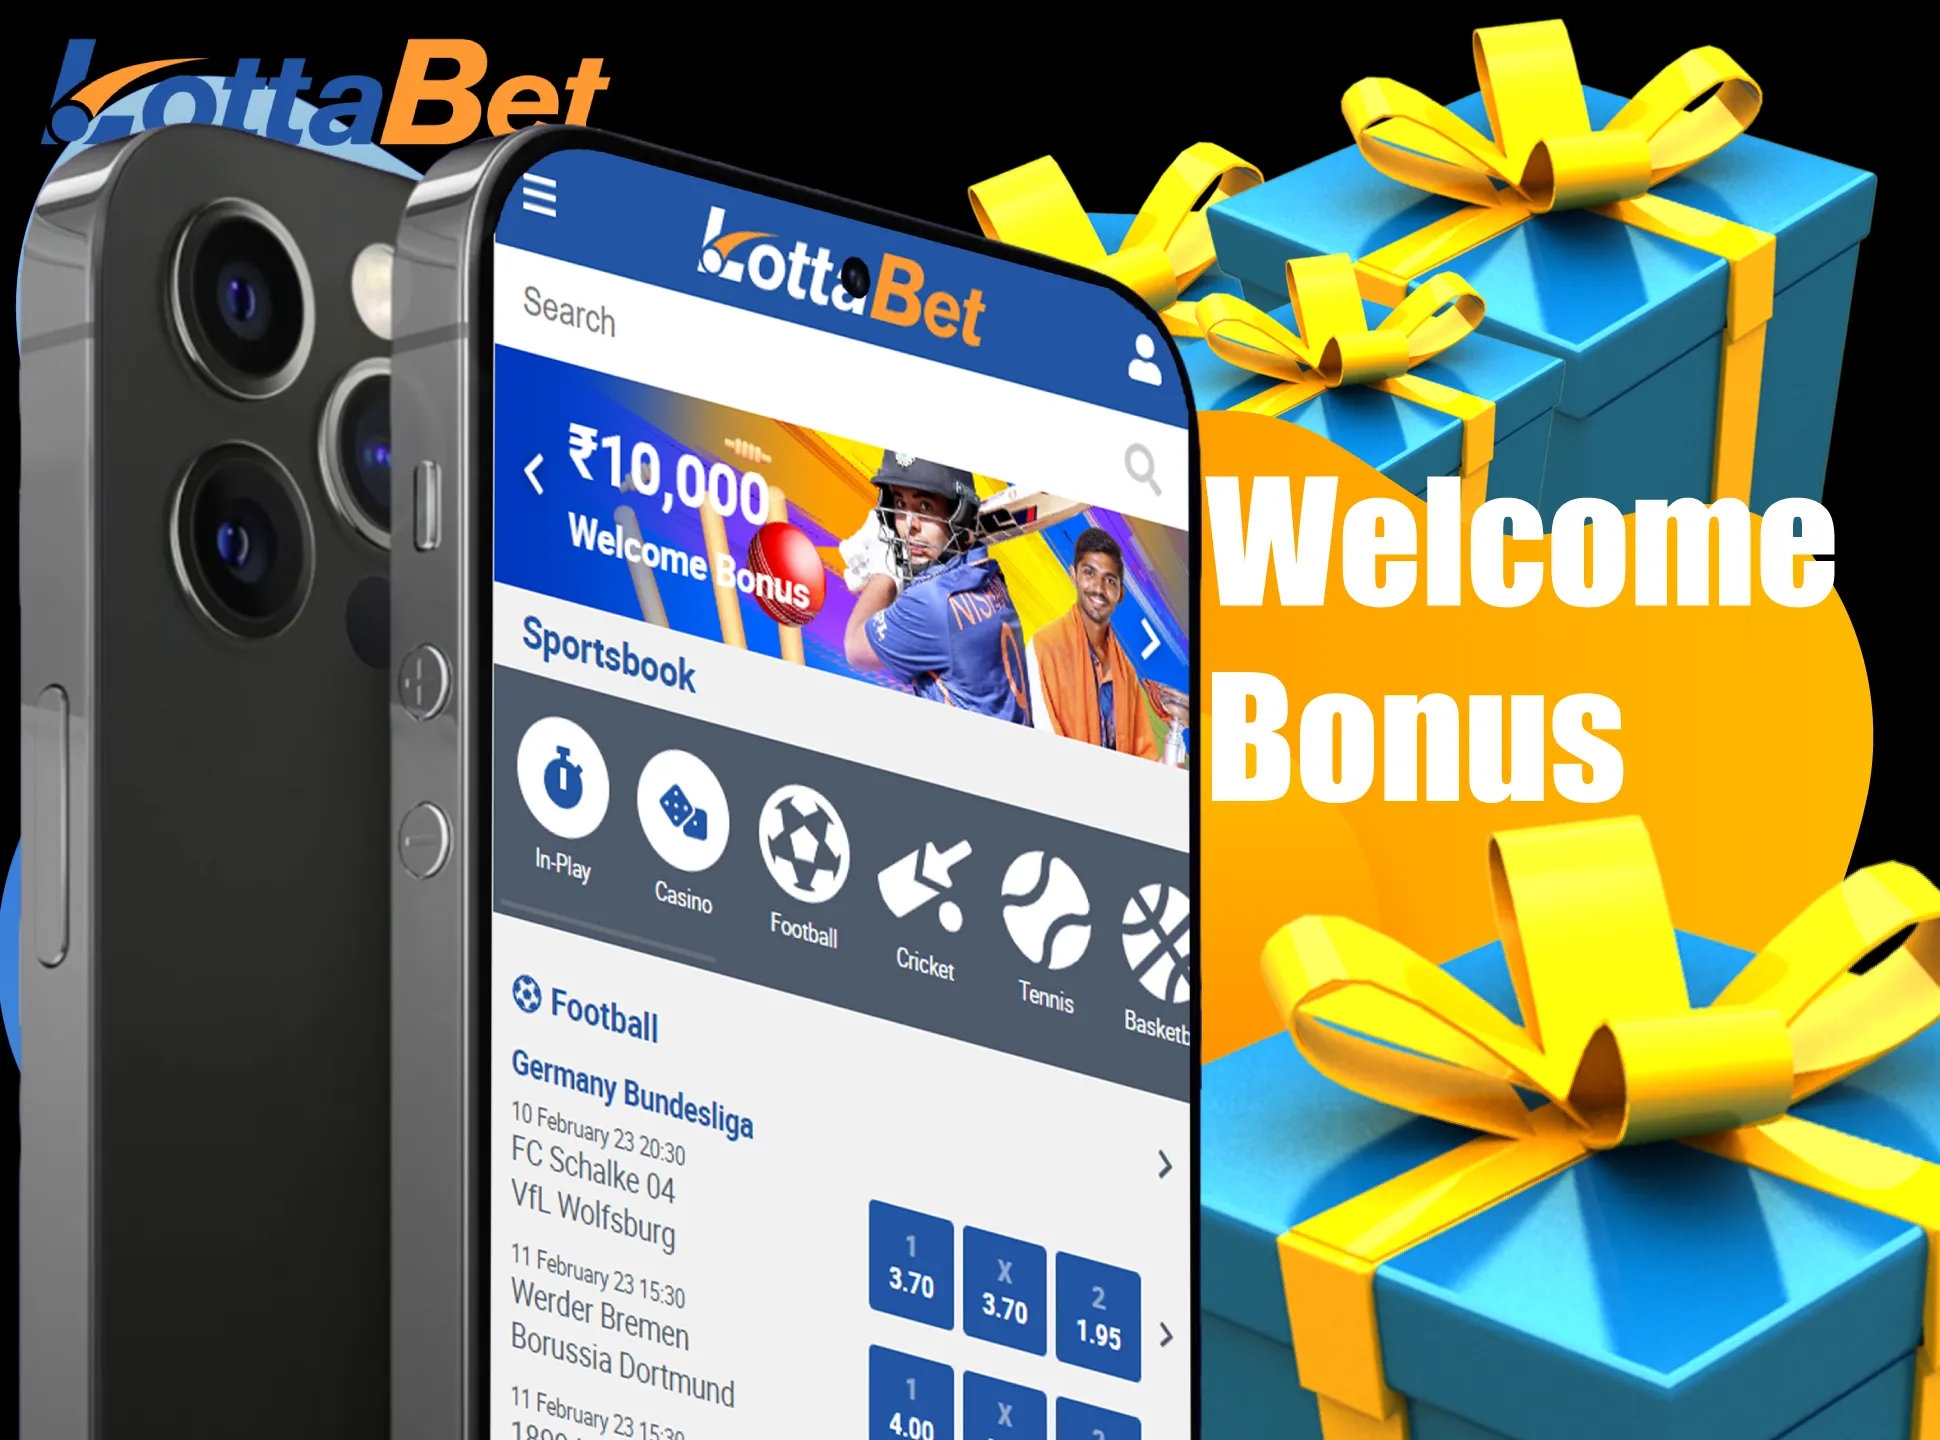 Get unicque welcome bonuses right after the first deposit at Lottabet.